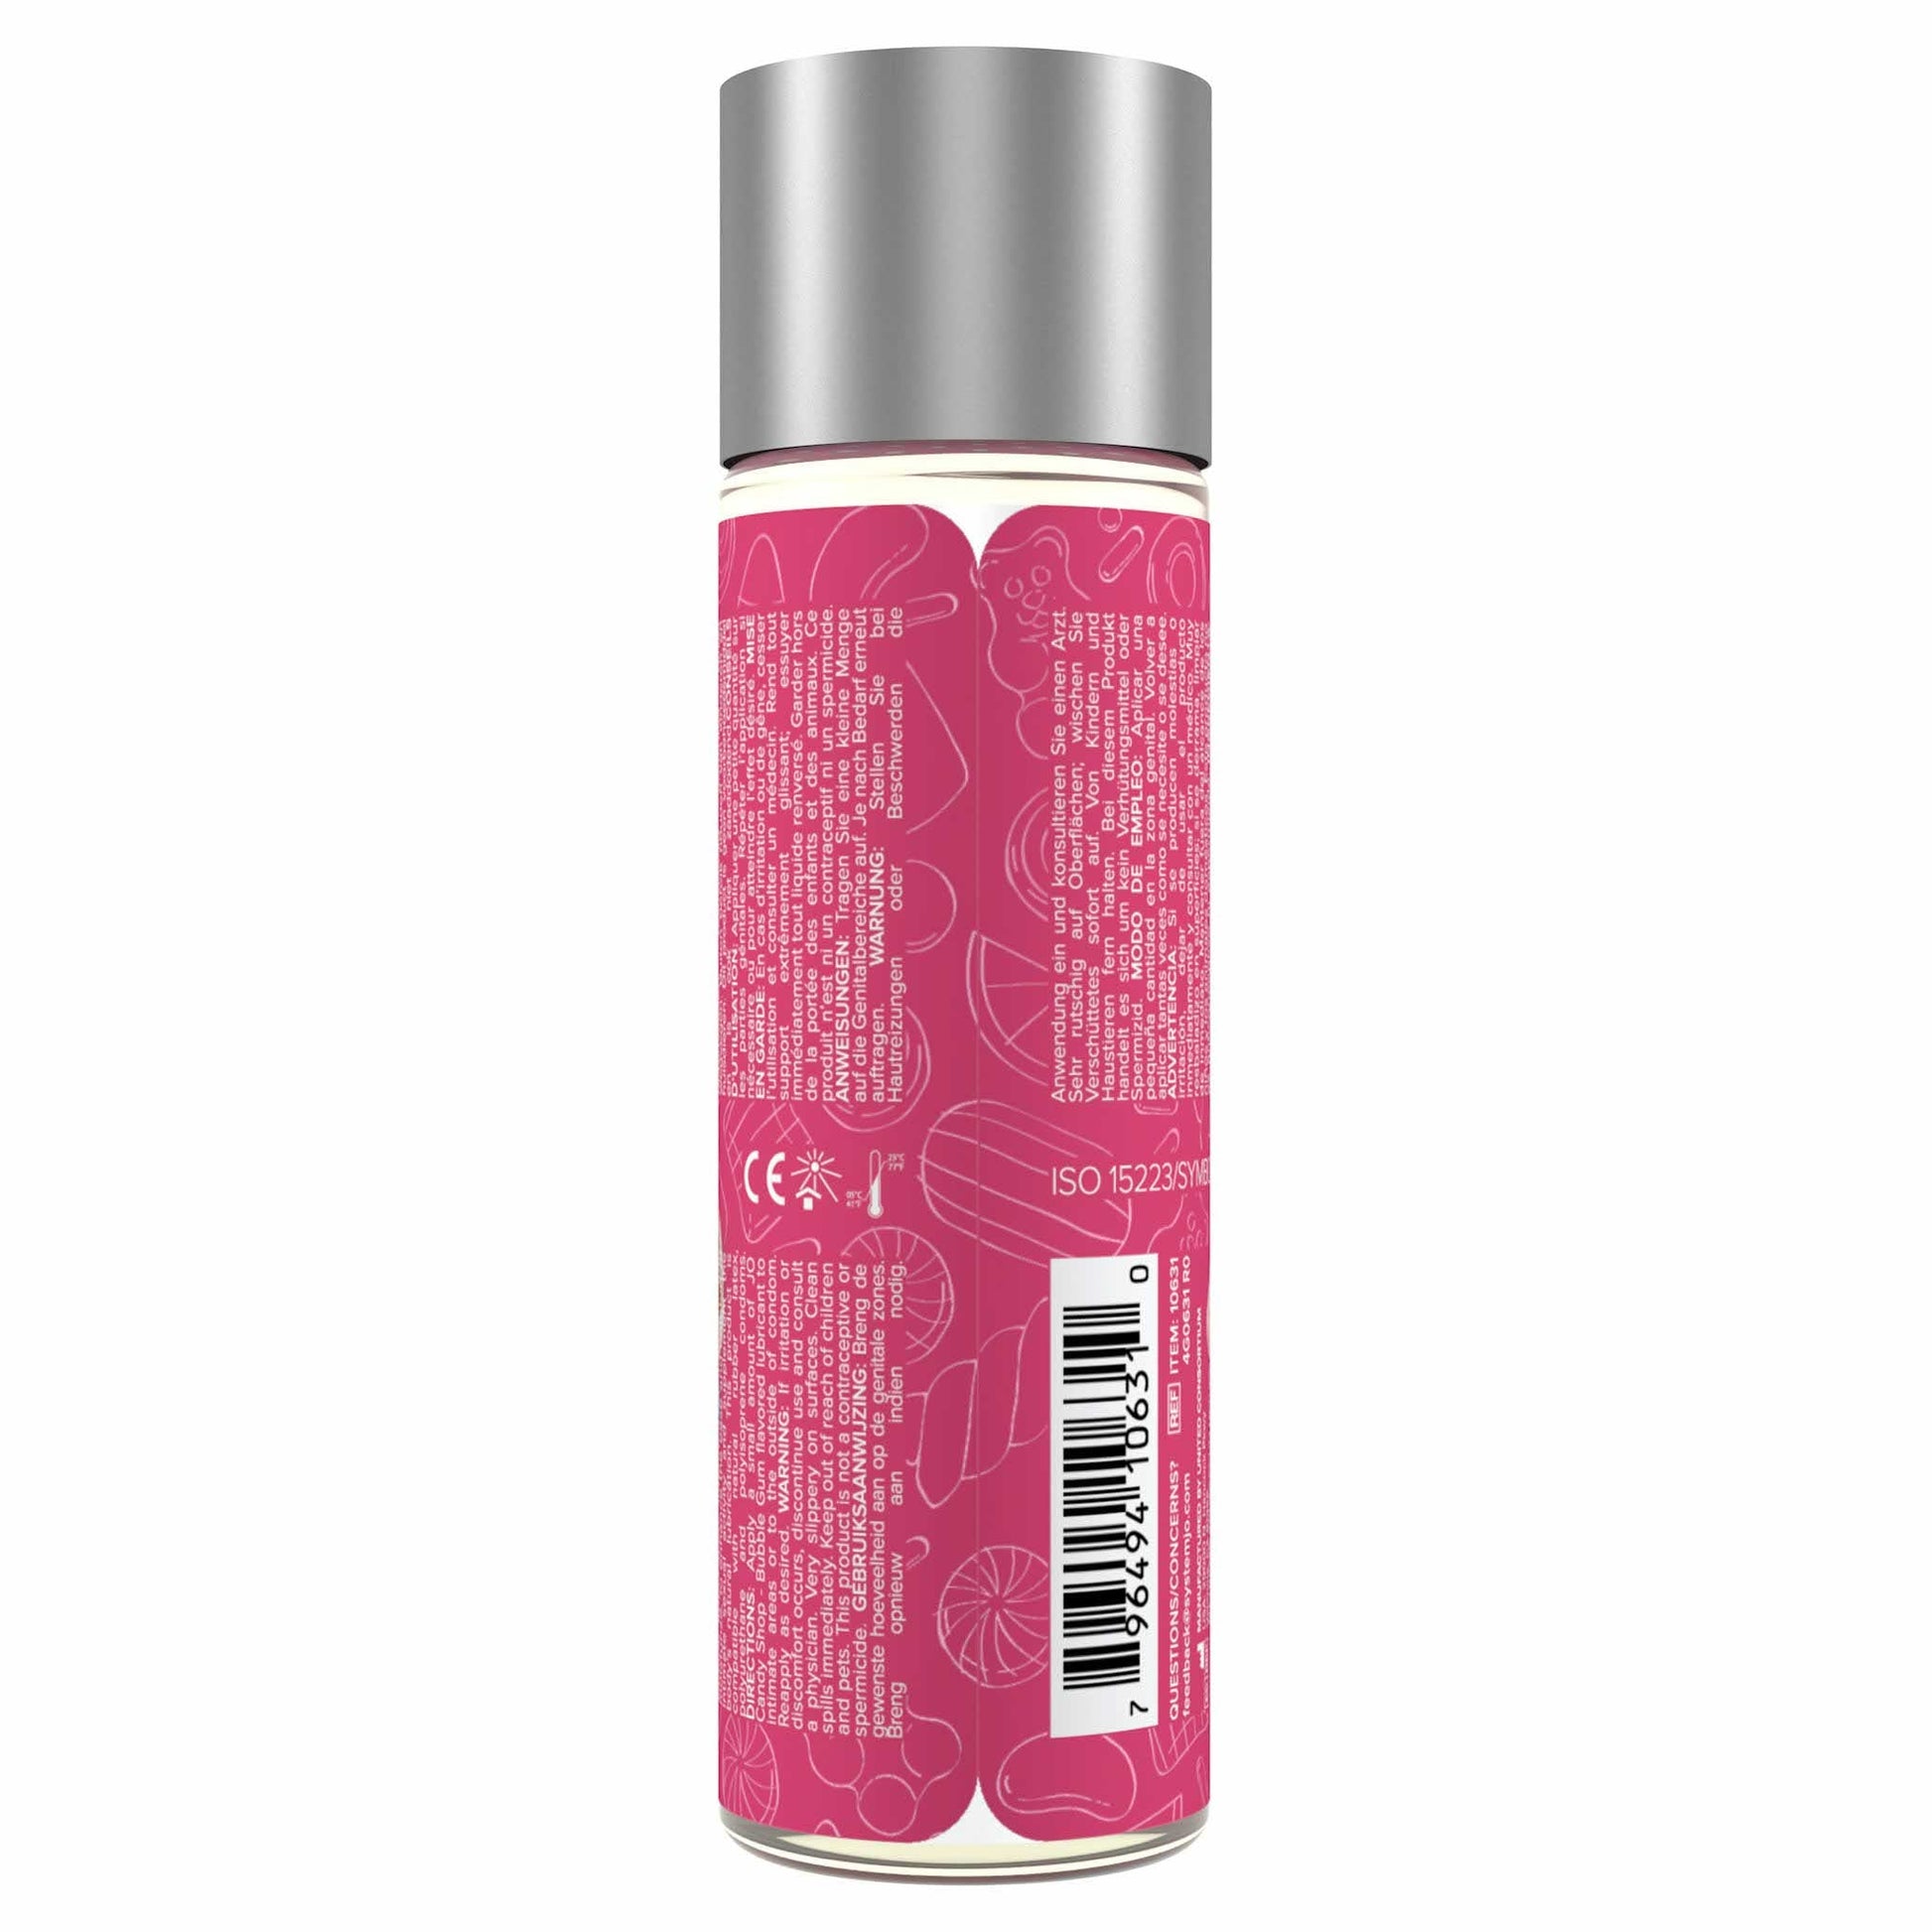 back view of the jo h2o candy shop water-based flavored personal lubricant 2 fl. oz. 4g0631 cotton